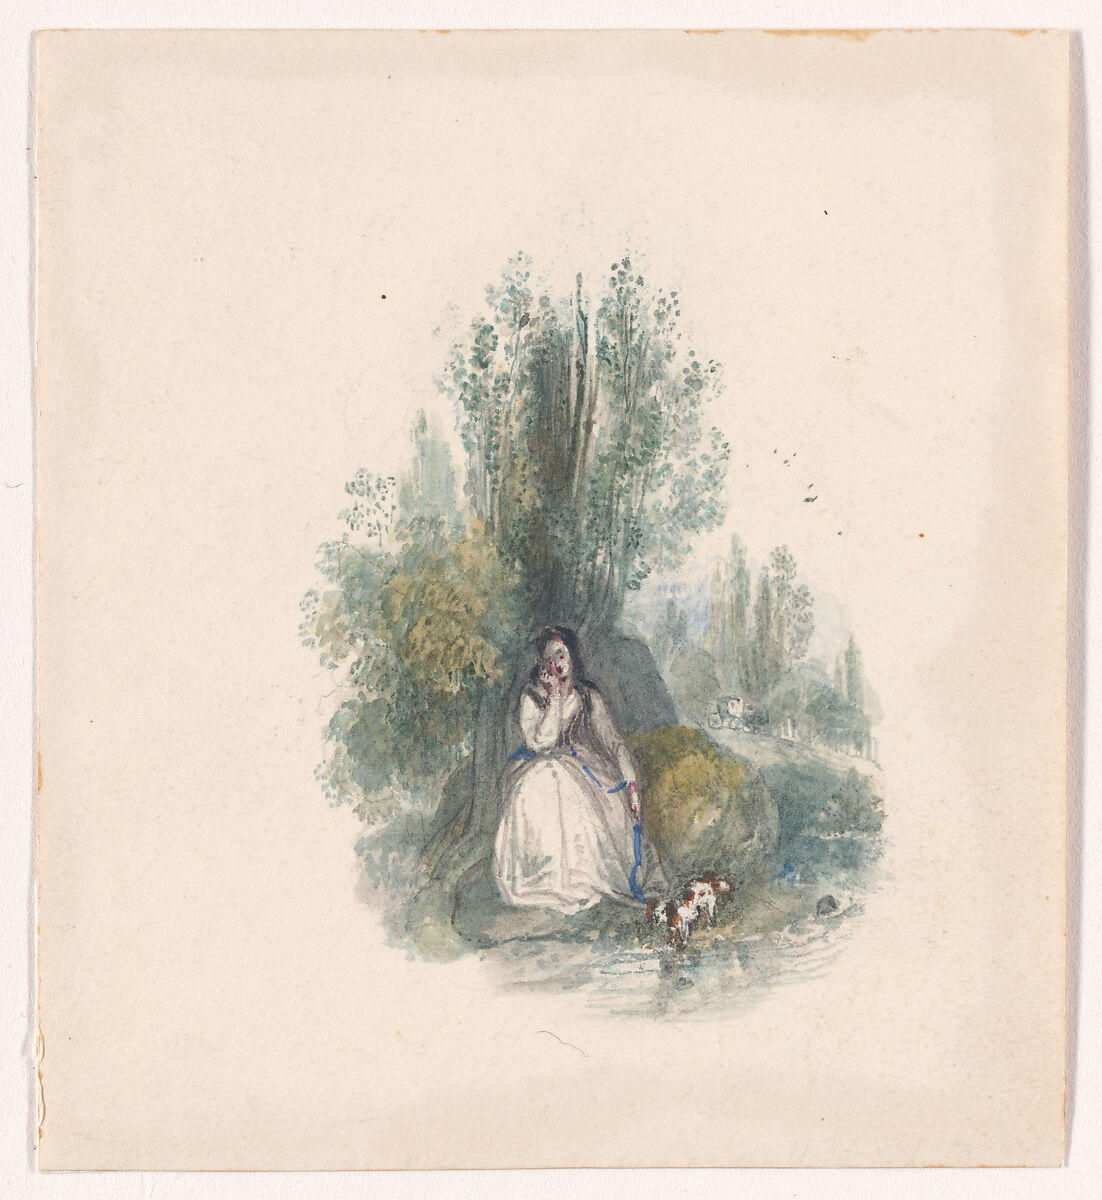 Illustration design for "The Economy of Human Life", Frank Howard (British, London 1805–1866 Liverpool), Watercolor 